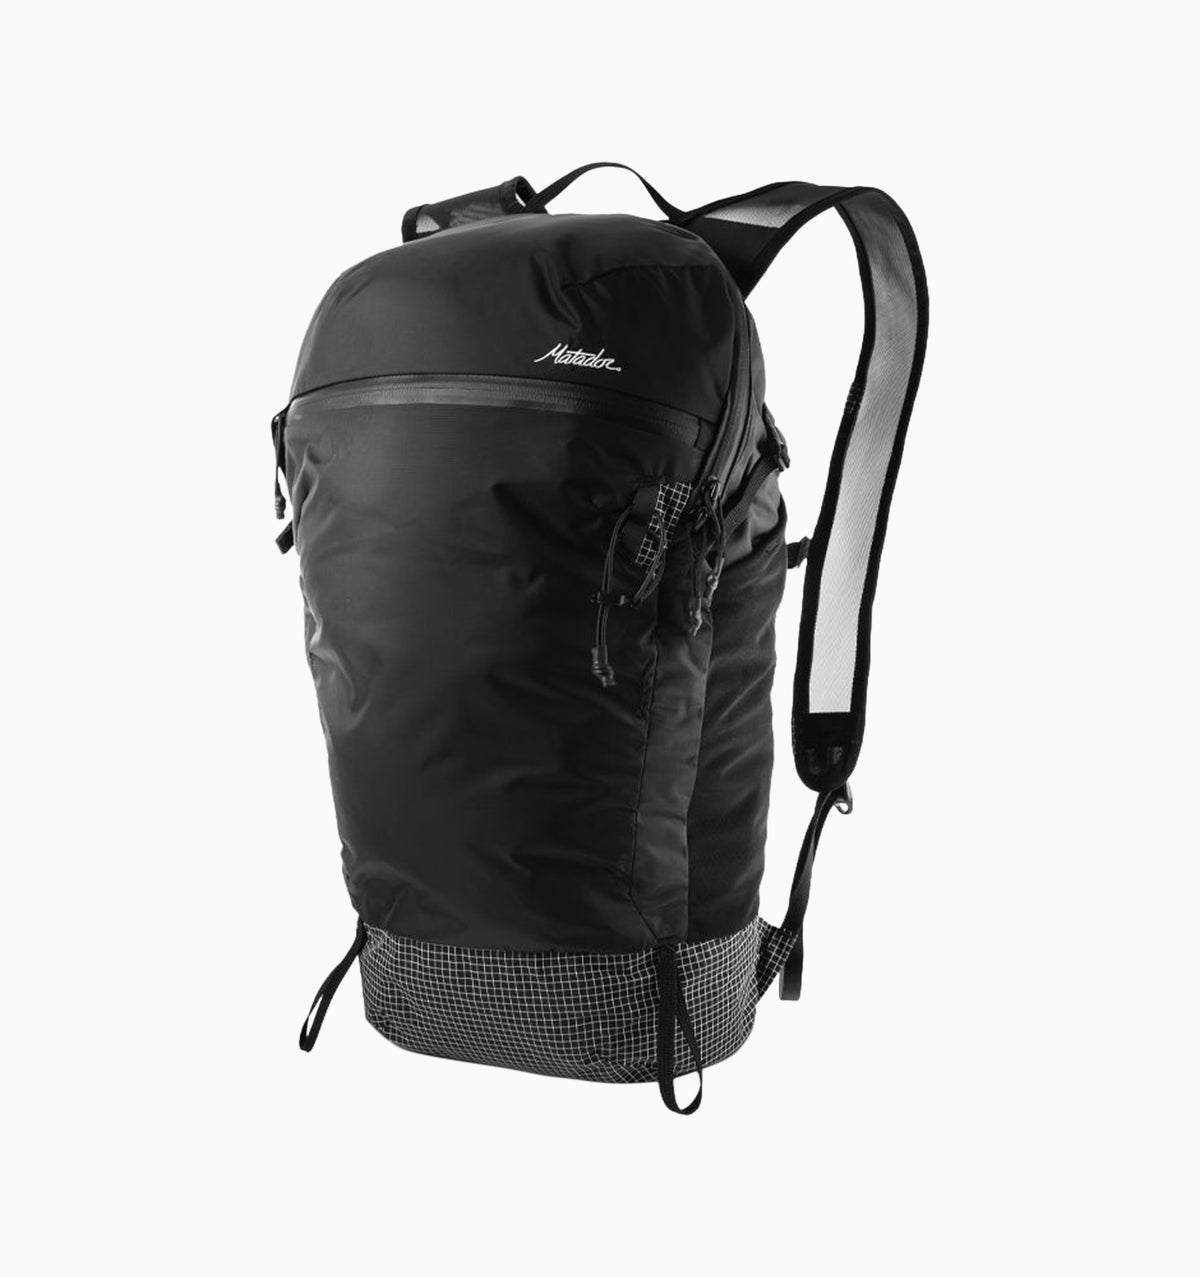 Matador Freefly16 Packable Backpack 16L - Charcoal